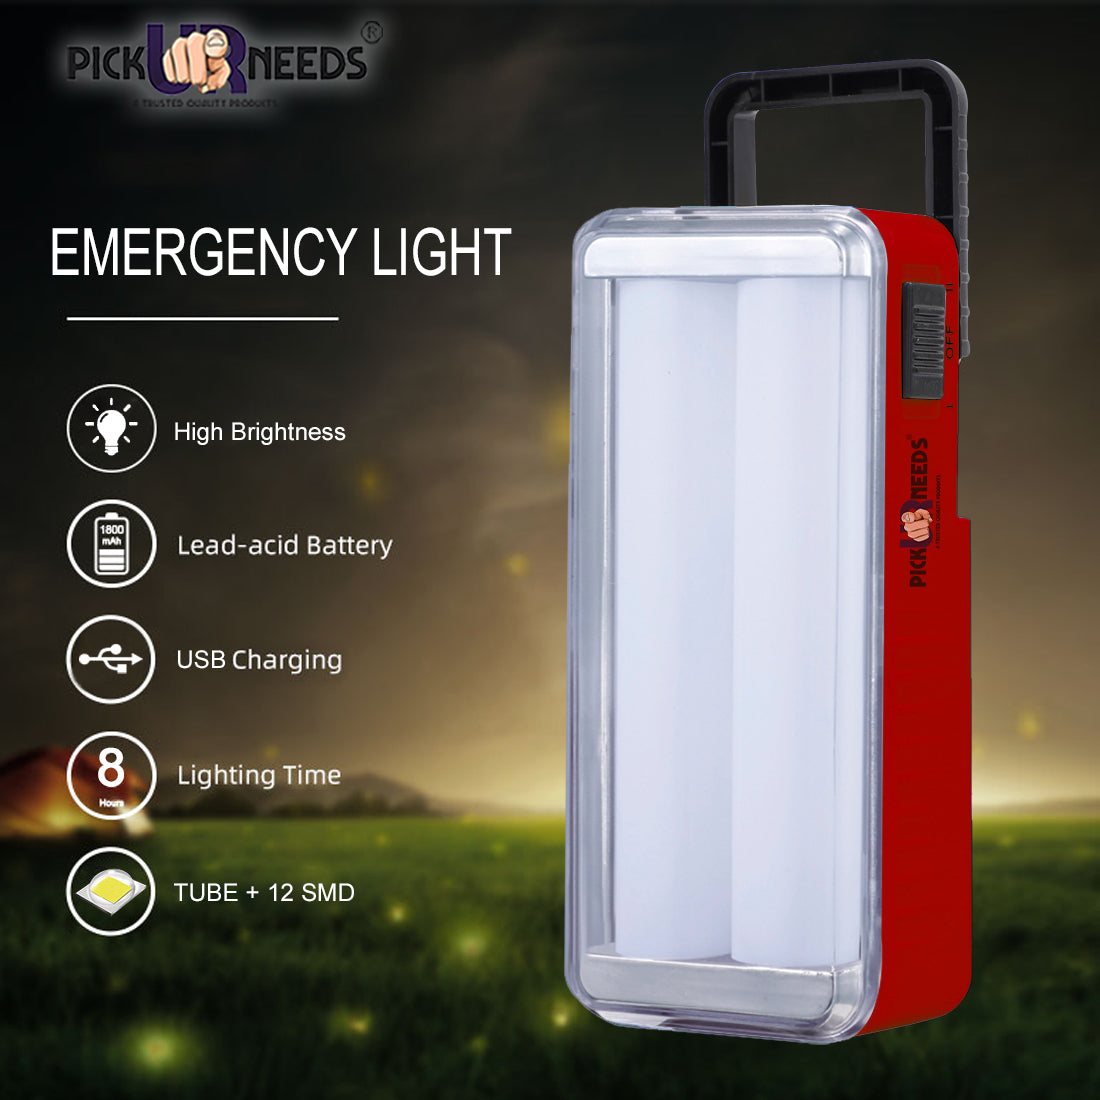 Pick Ur Needs High-Bright 2 Tube Rechargeable Floor Lantern Lamp With 5 Hrs Emergency Light